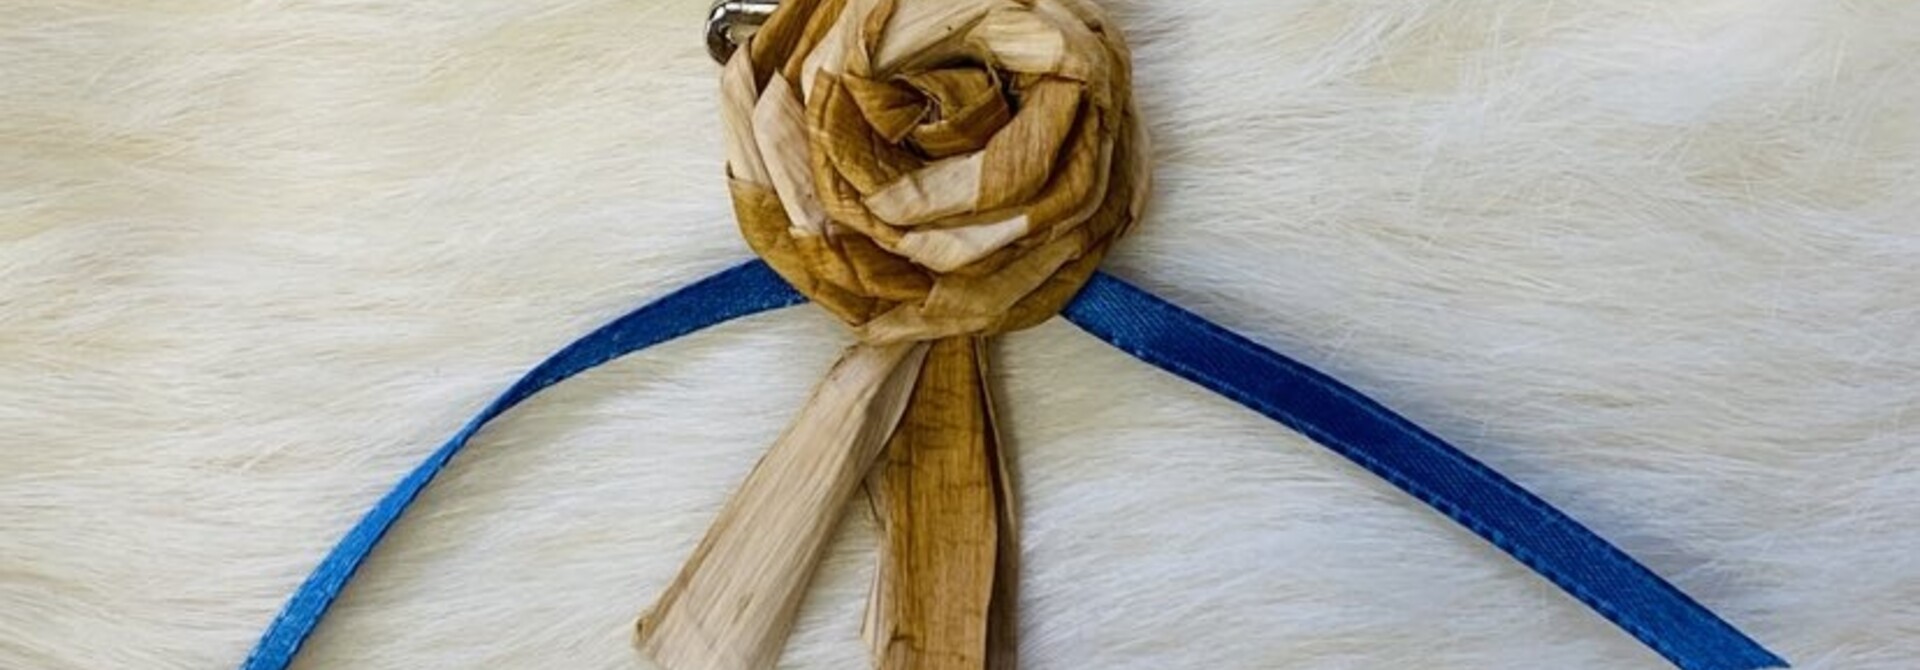 Cedar Rose Pin with Ribbon by Gracie Kelly